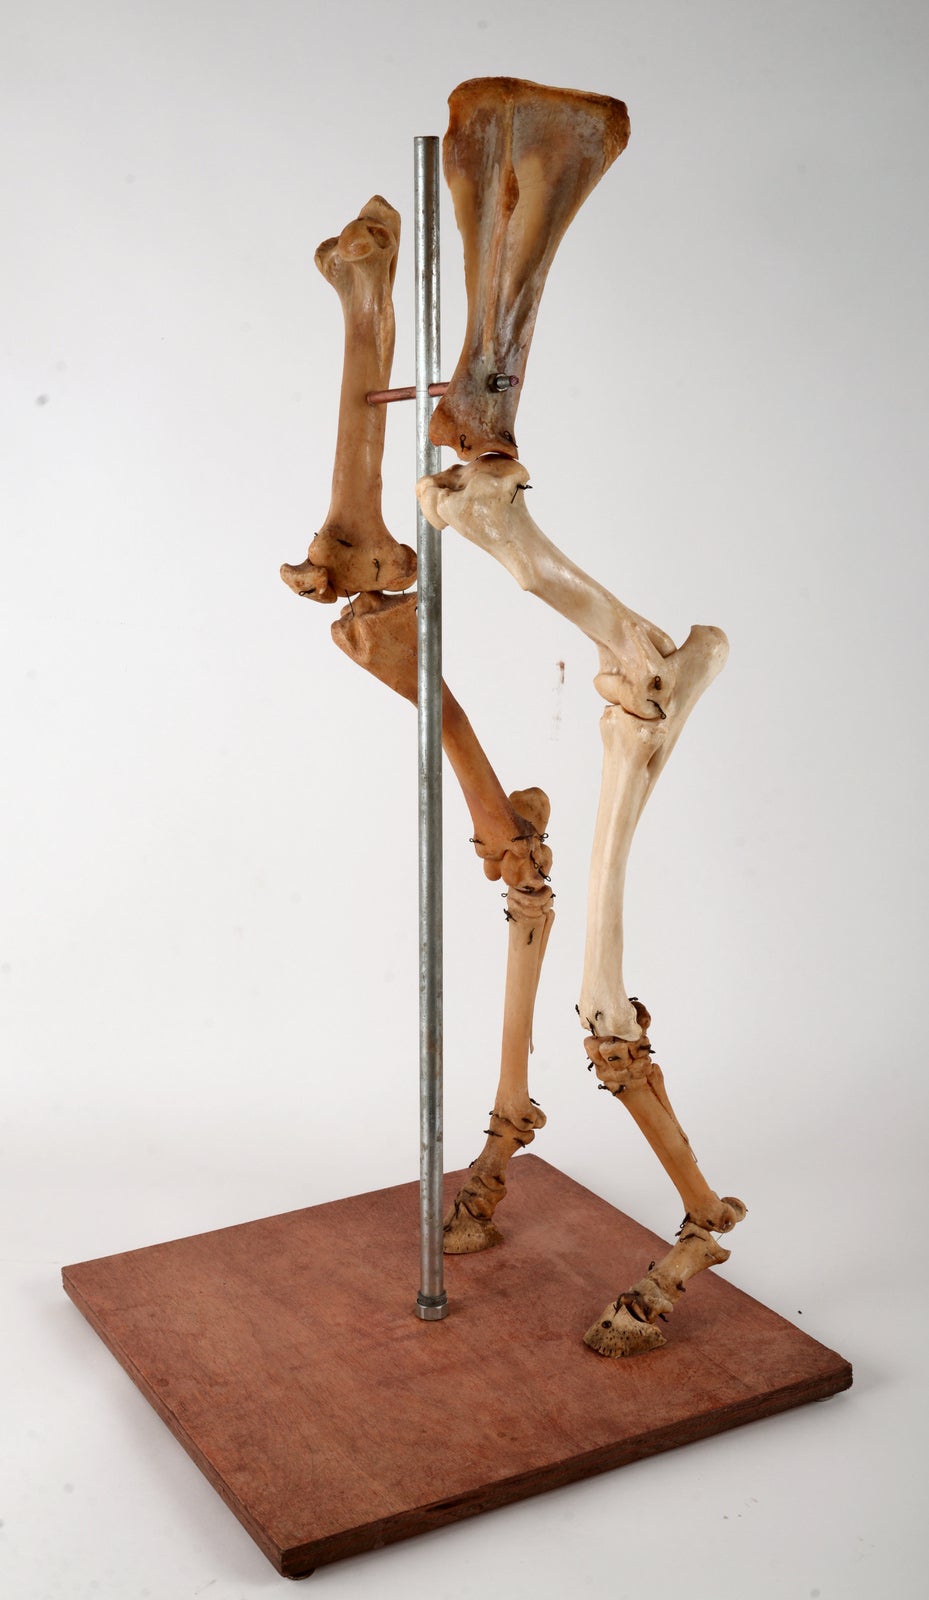 While we don't know the true origin of this very unusual assemblage it has been suggested that it may have come from a veterinary school. None of the bones seem be from the same animal but the overall look and feel are somewhat believable as though